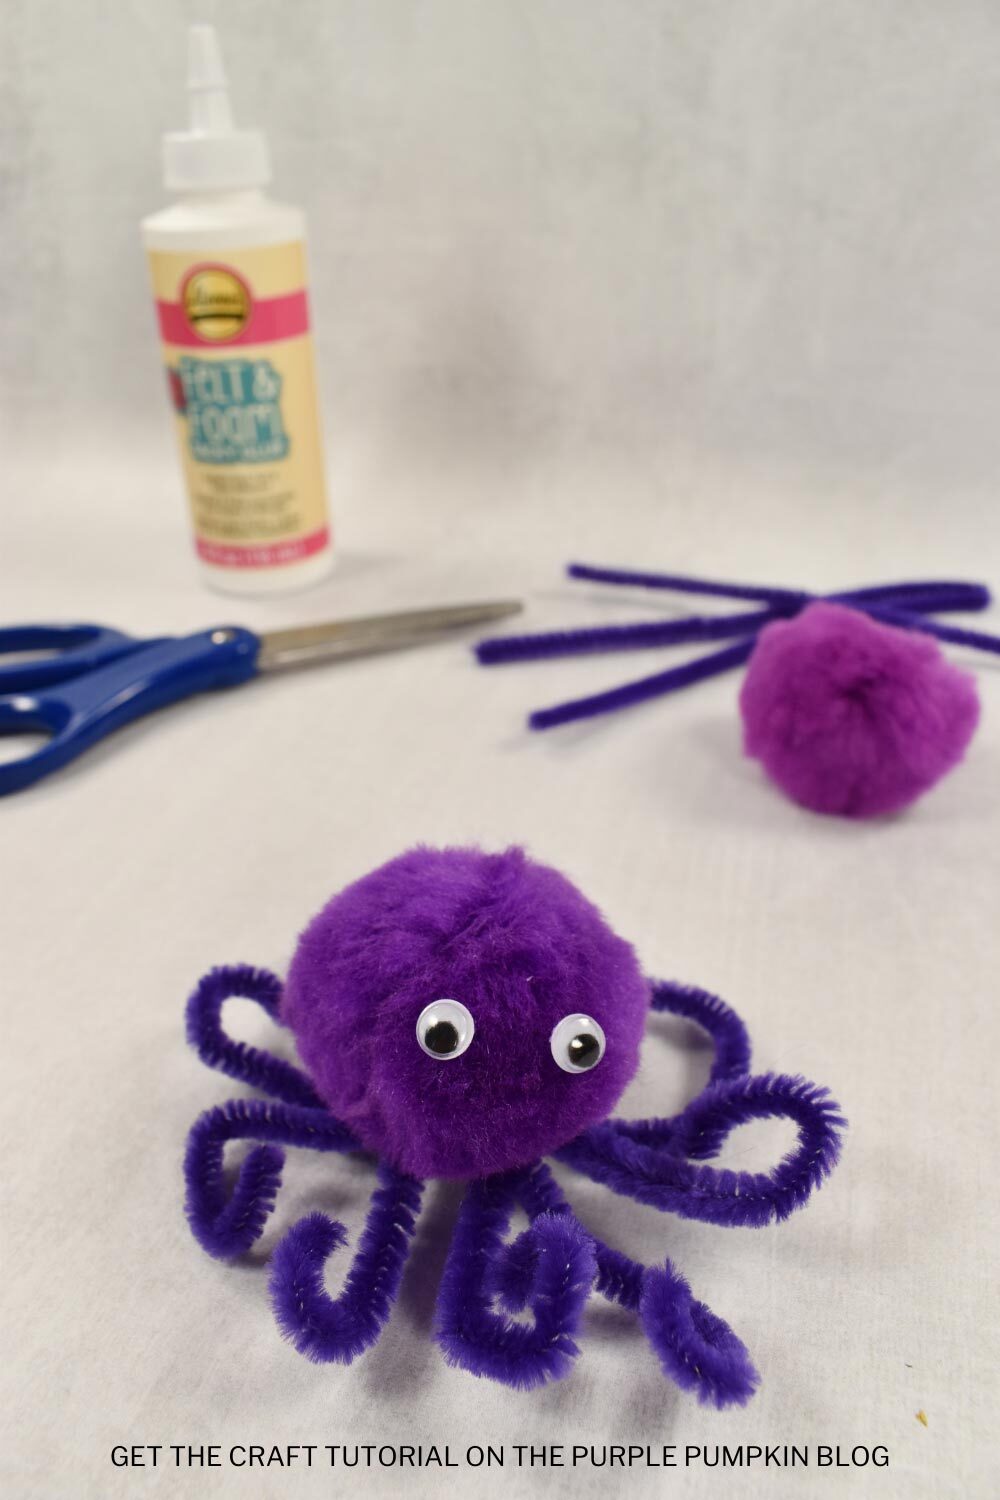 How To Make an Octopus with Pipe Cleaners